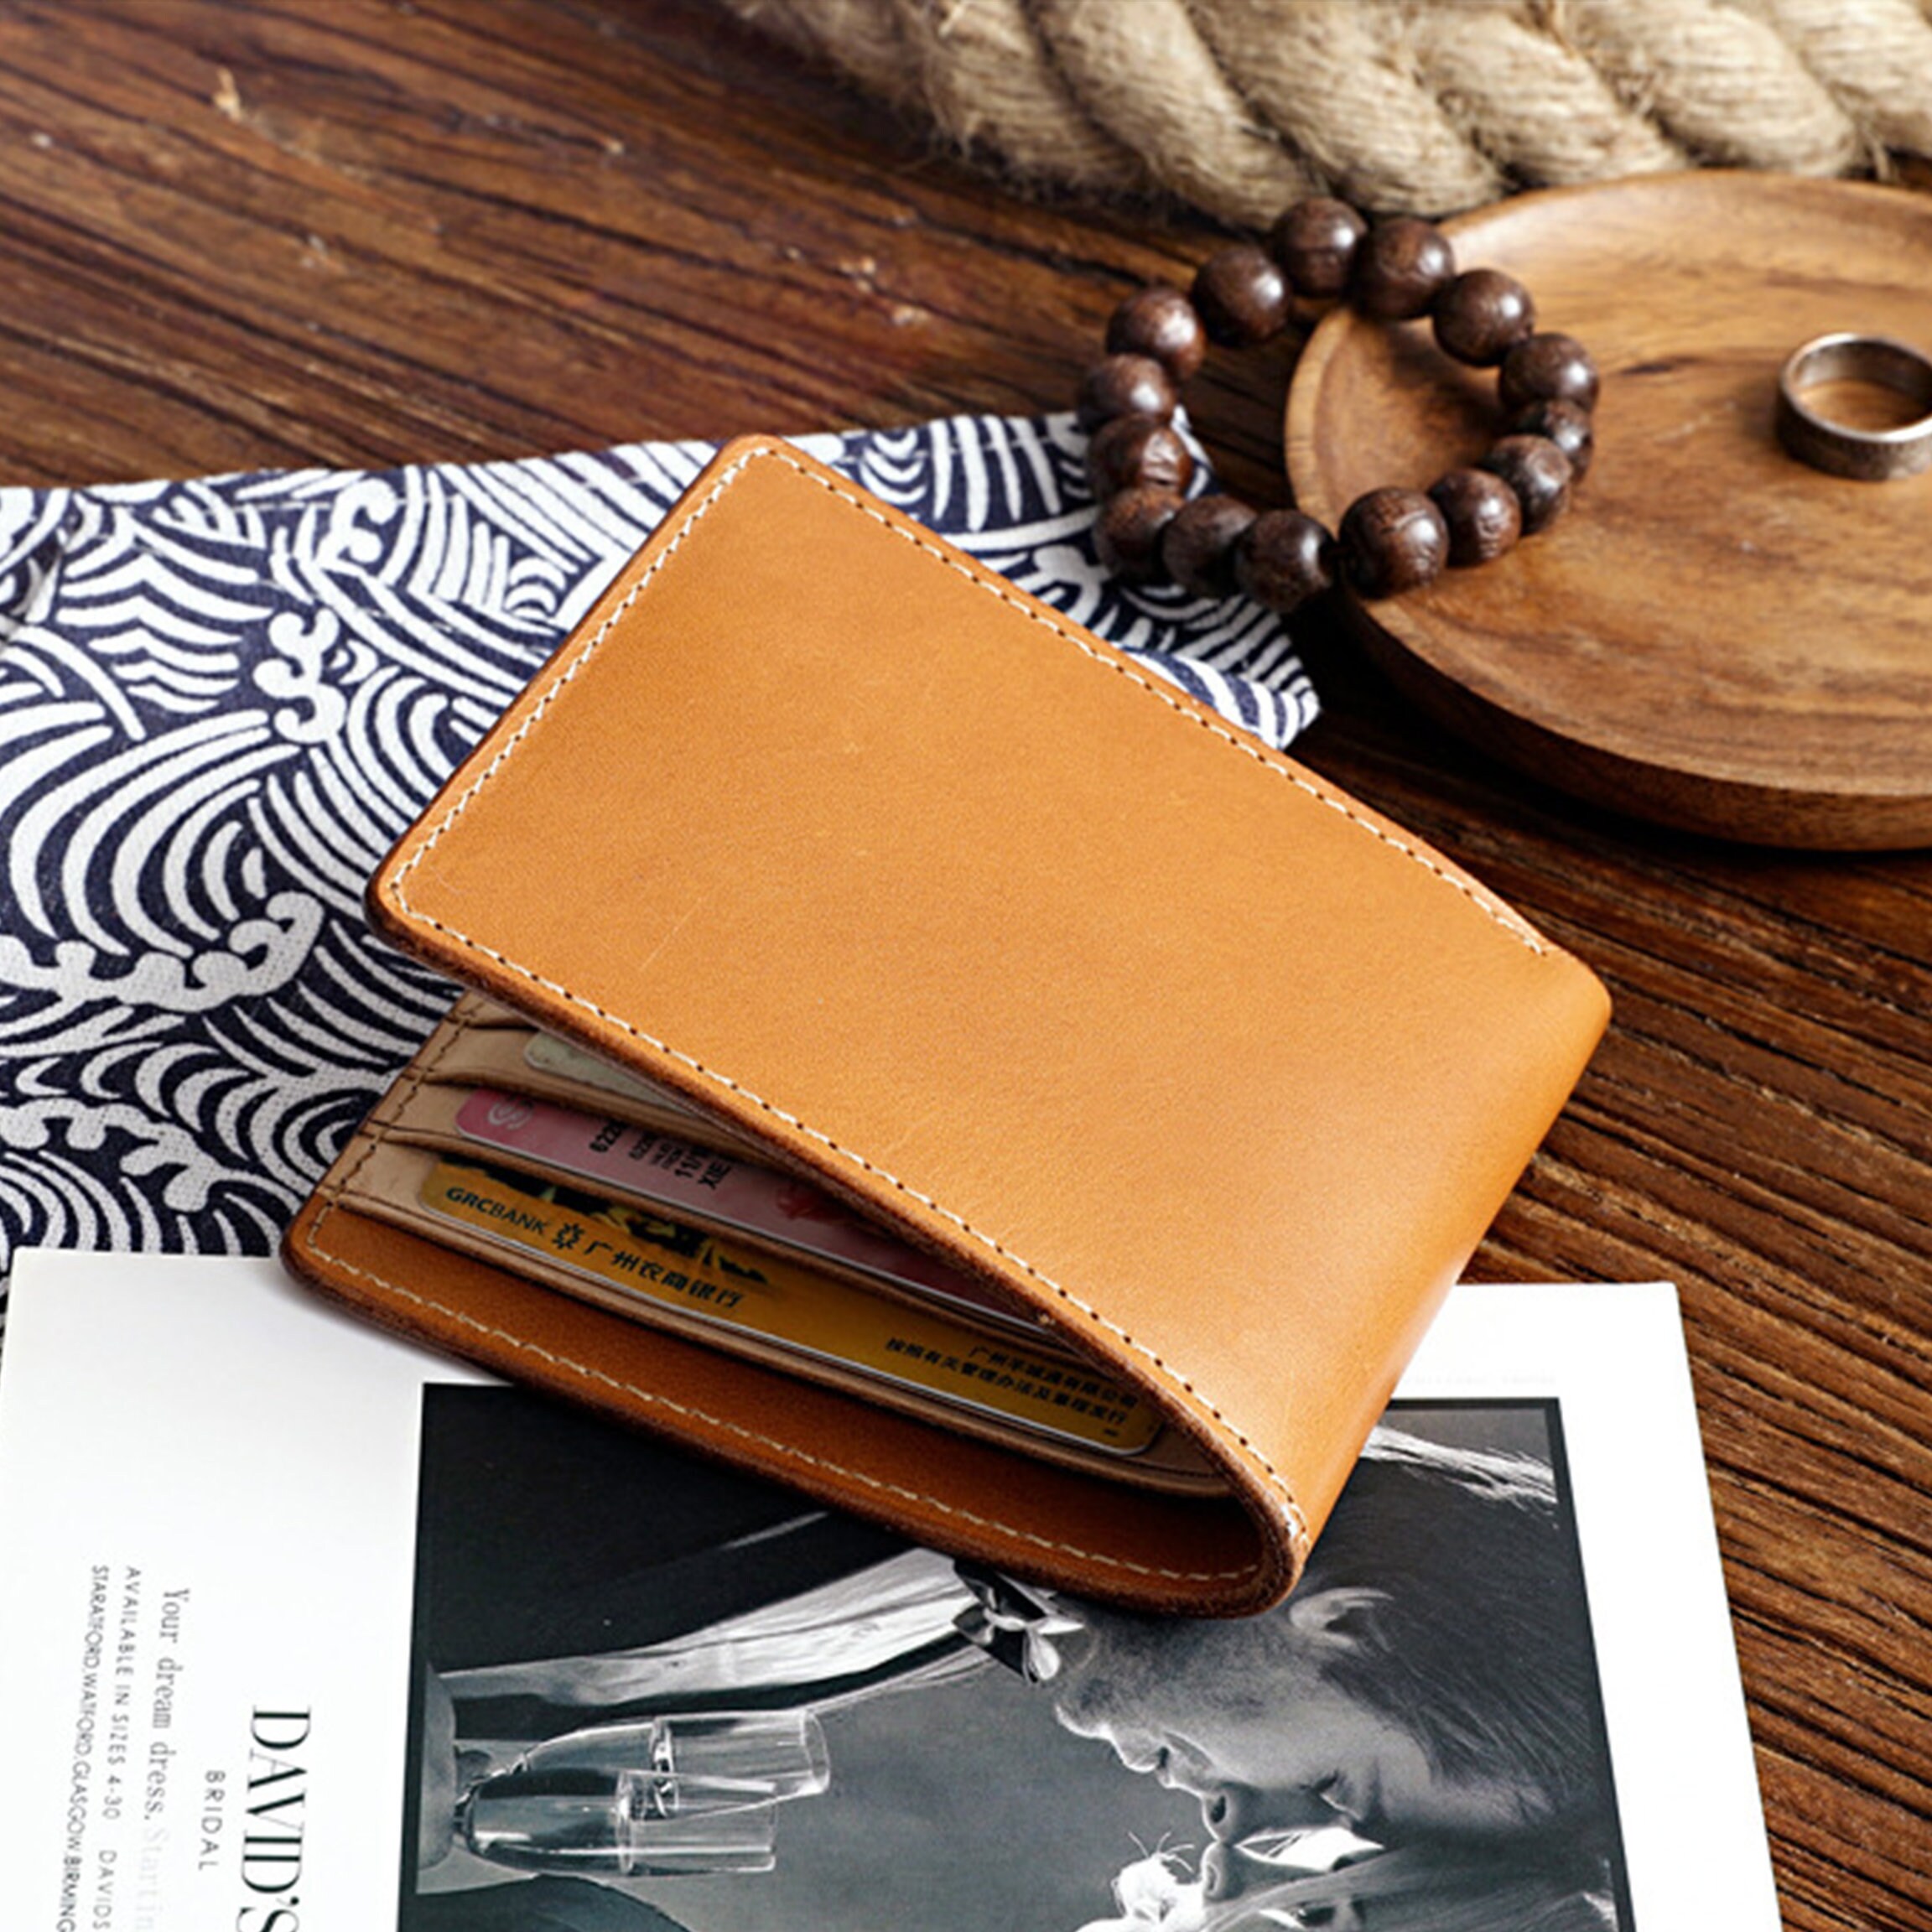 women's small yellow wallet, natural leather wallet